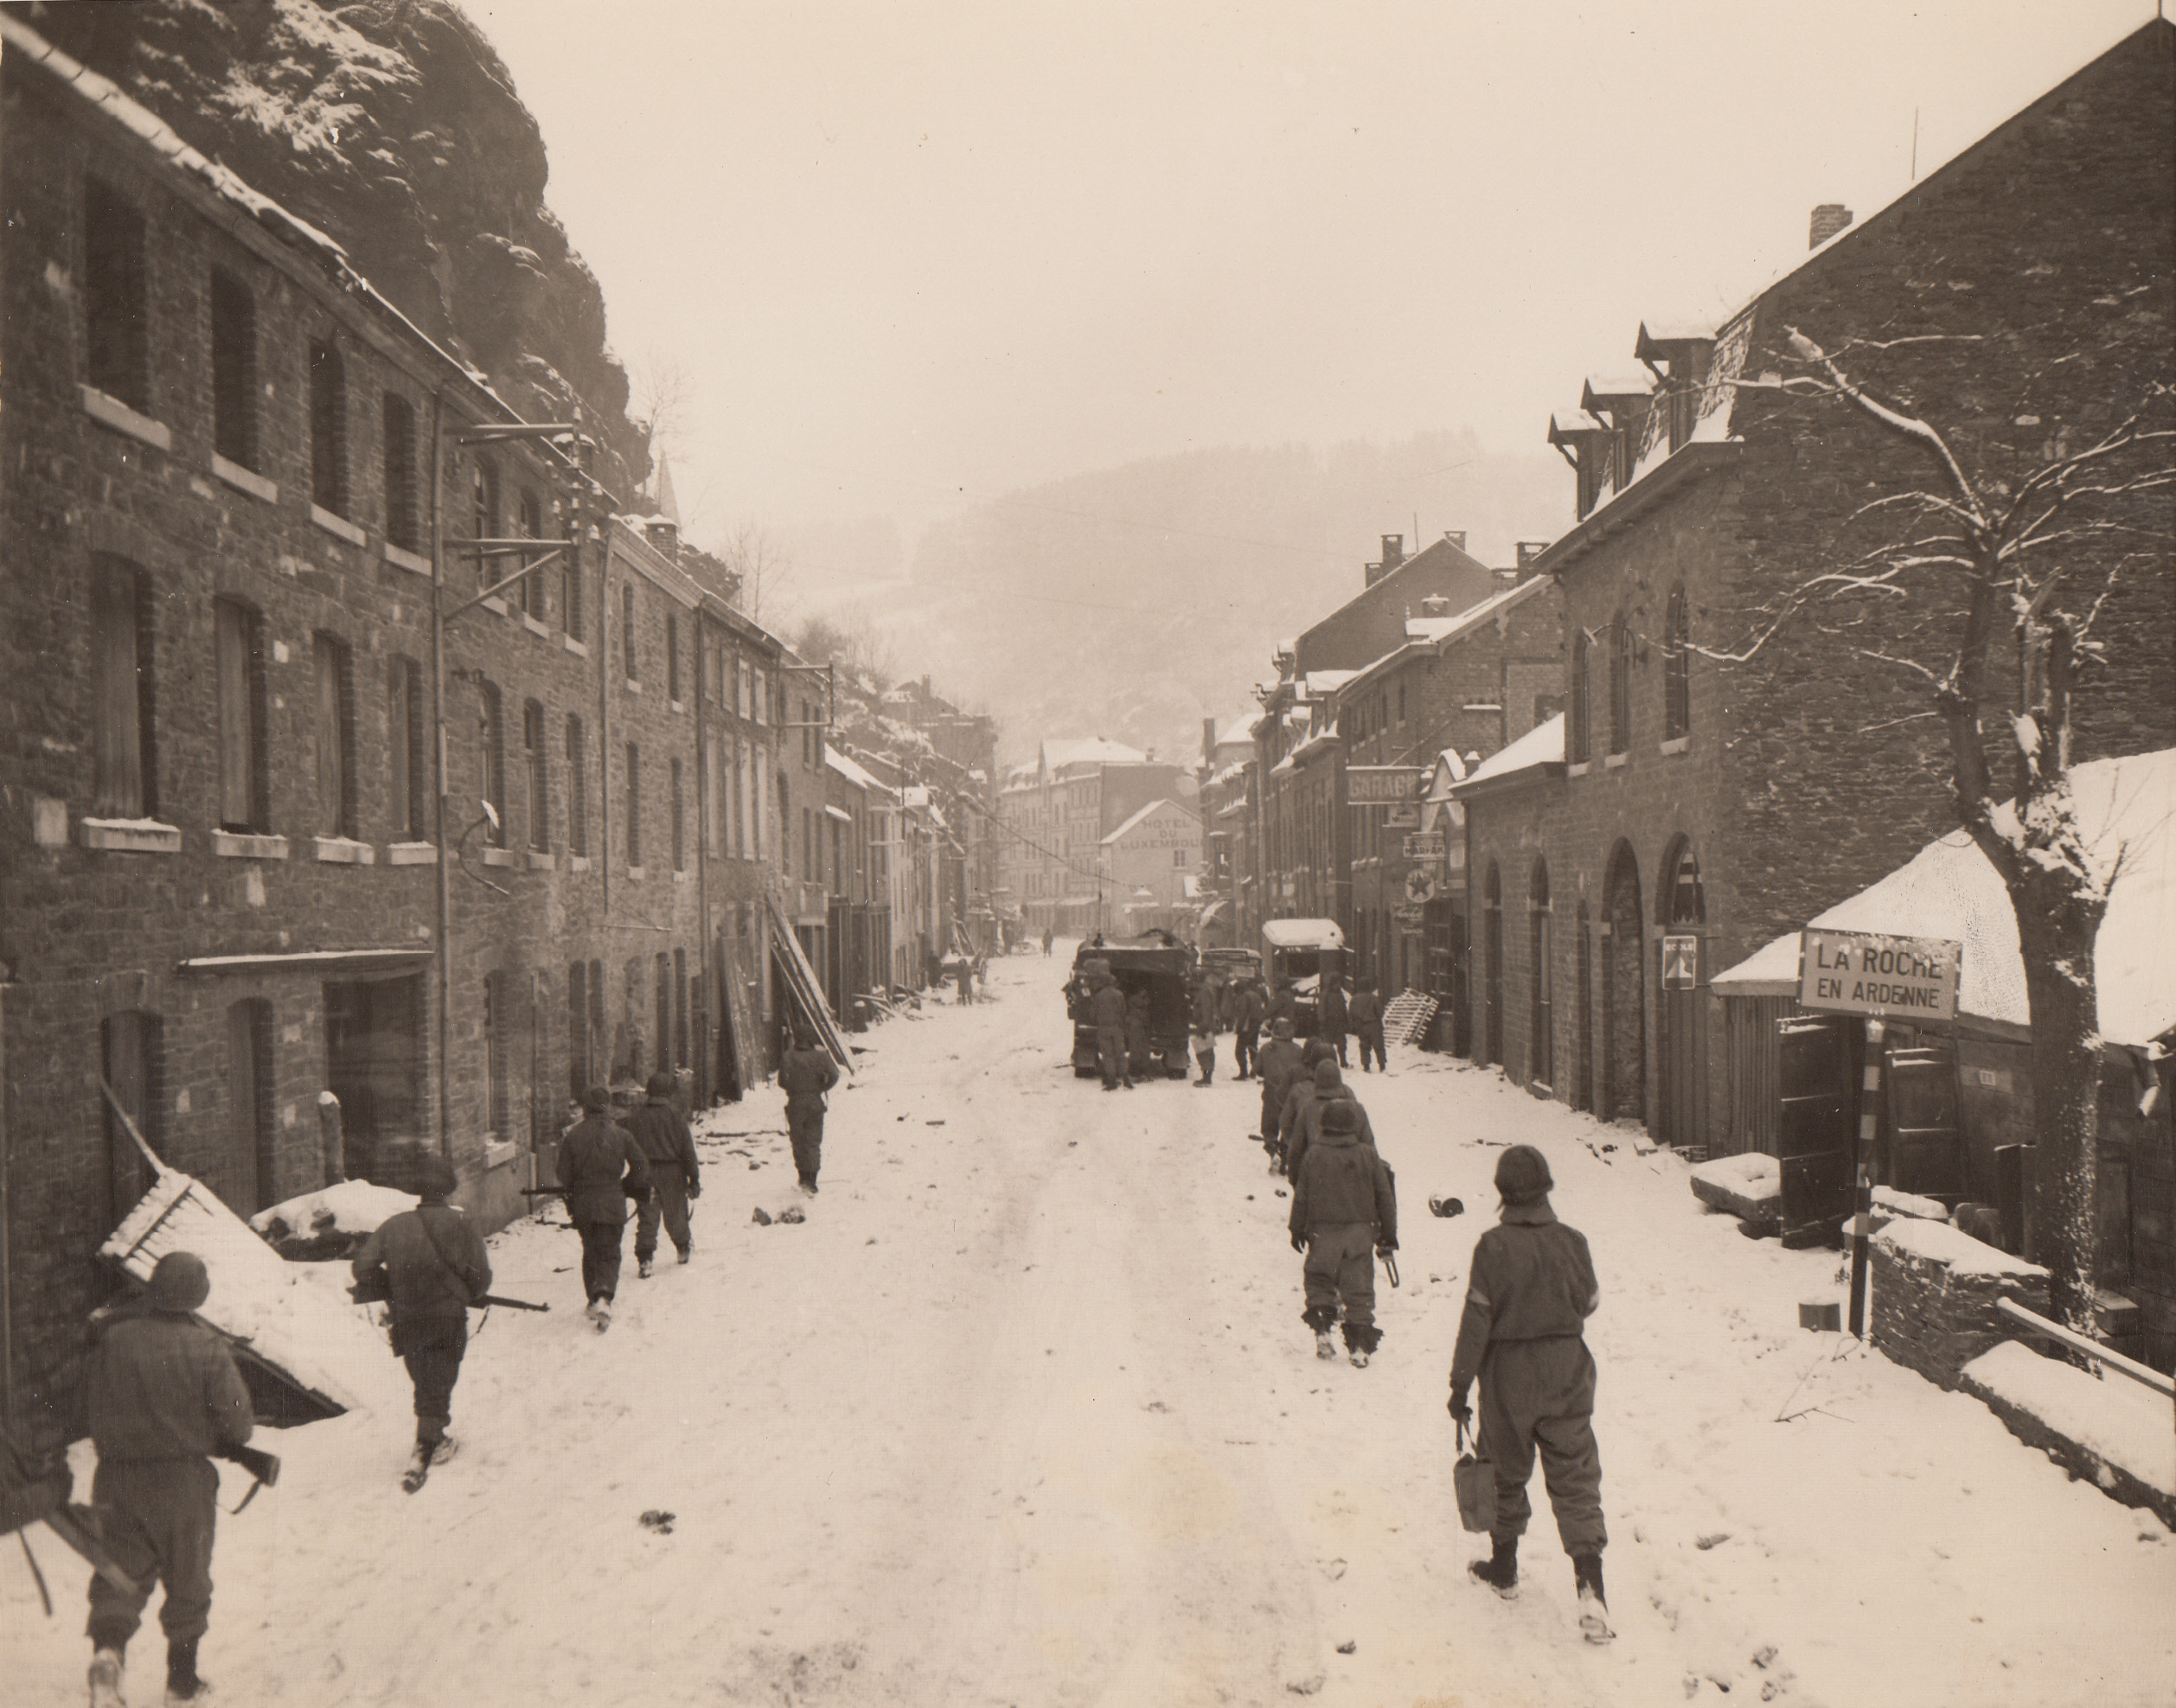 YANKS ENTER LA ROCHE, 1/19/1945. BELGIUM—Snow still falls on the battle-scarred town of La Roche as American soldiers enter after Nazis had been driven into the hills. Yanks walk in single file on both sides of road.;